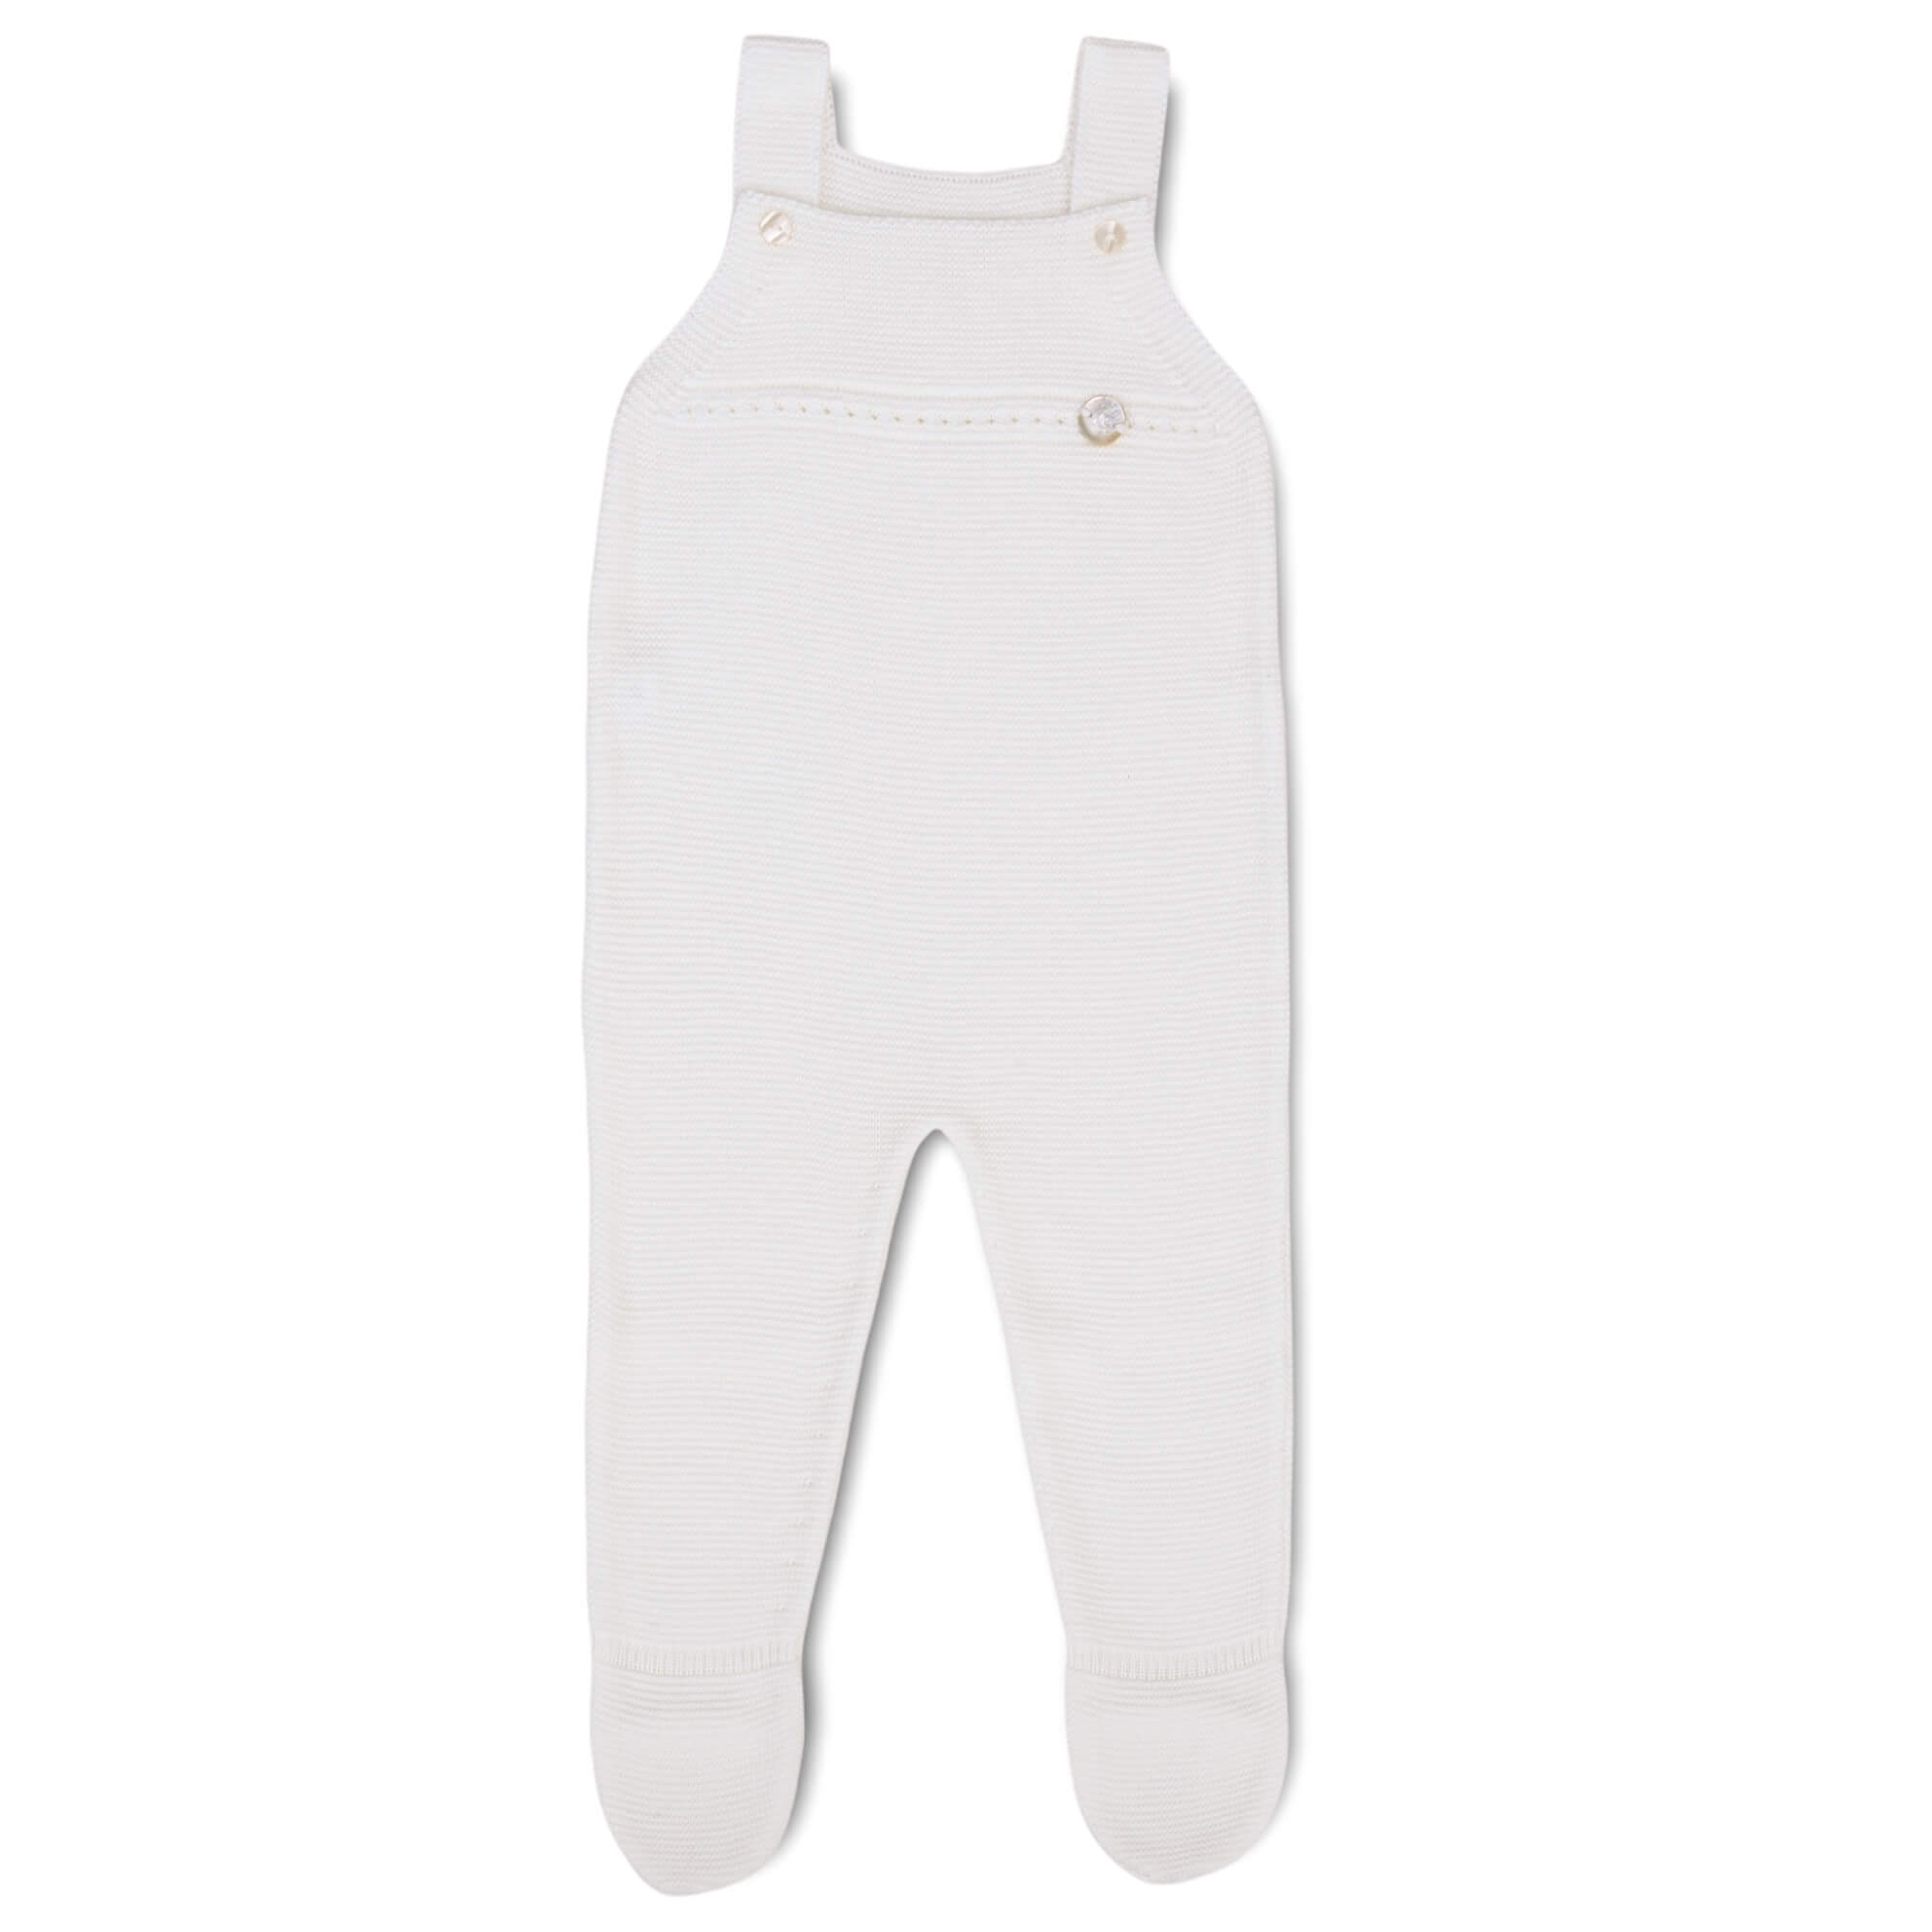 Granlei knitted baby dungarees, made in Spain